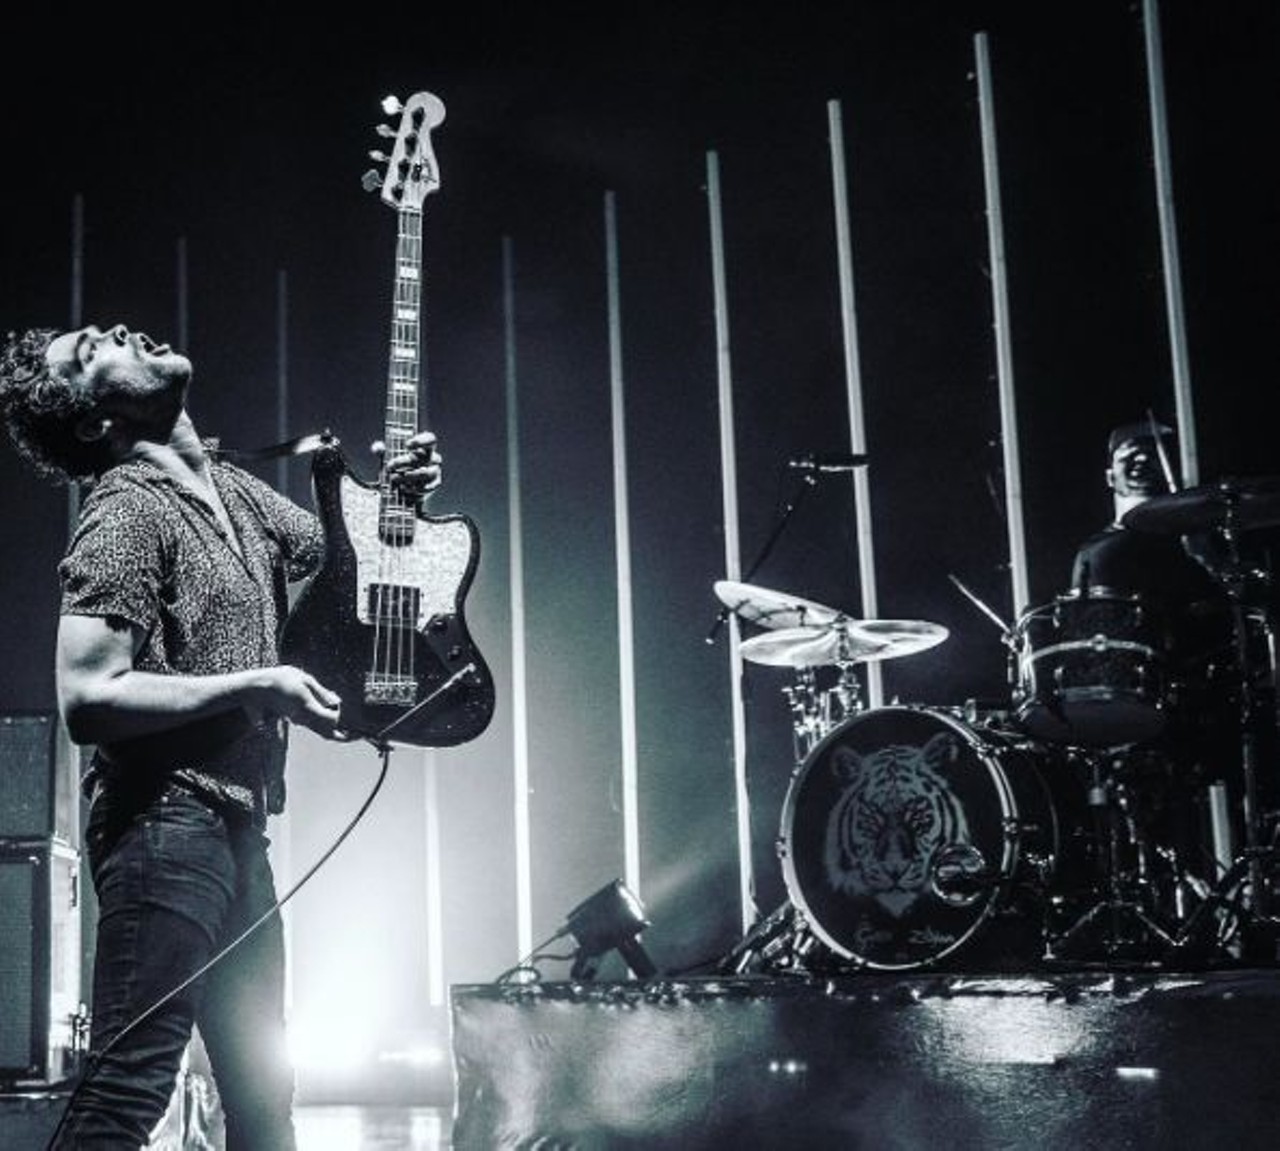 Royal Blood
Friday, 6/9
Royal Blood will be headlining a show at Saint Andrew&#146;s Hall at the beginning of June. Don&#146;t miss out on the chance to listen to this British rock duo at this intimate concert venue in the heart of downtown Detroit. This concert is a few weeks before the release of their next album &#147;How Did We Get So Dark?&#148; Maybe they will debut a few songs at the show!
7 p.m.; Saint Andrew&#146;s Hall, Detroit, MI; saintandrewsdetroit.com; only resale tickets available.
(Photo courtesy of IG user @danreidphoto)